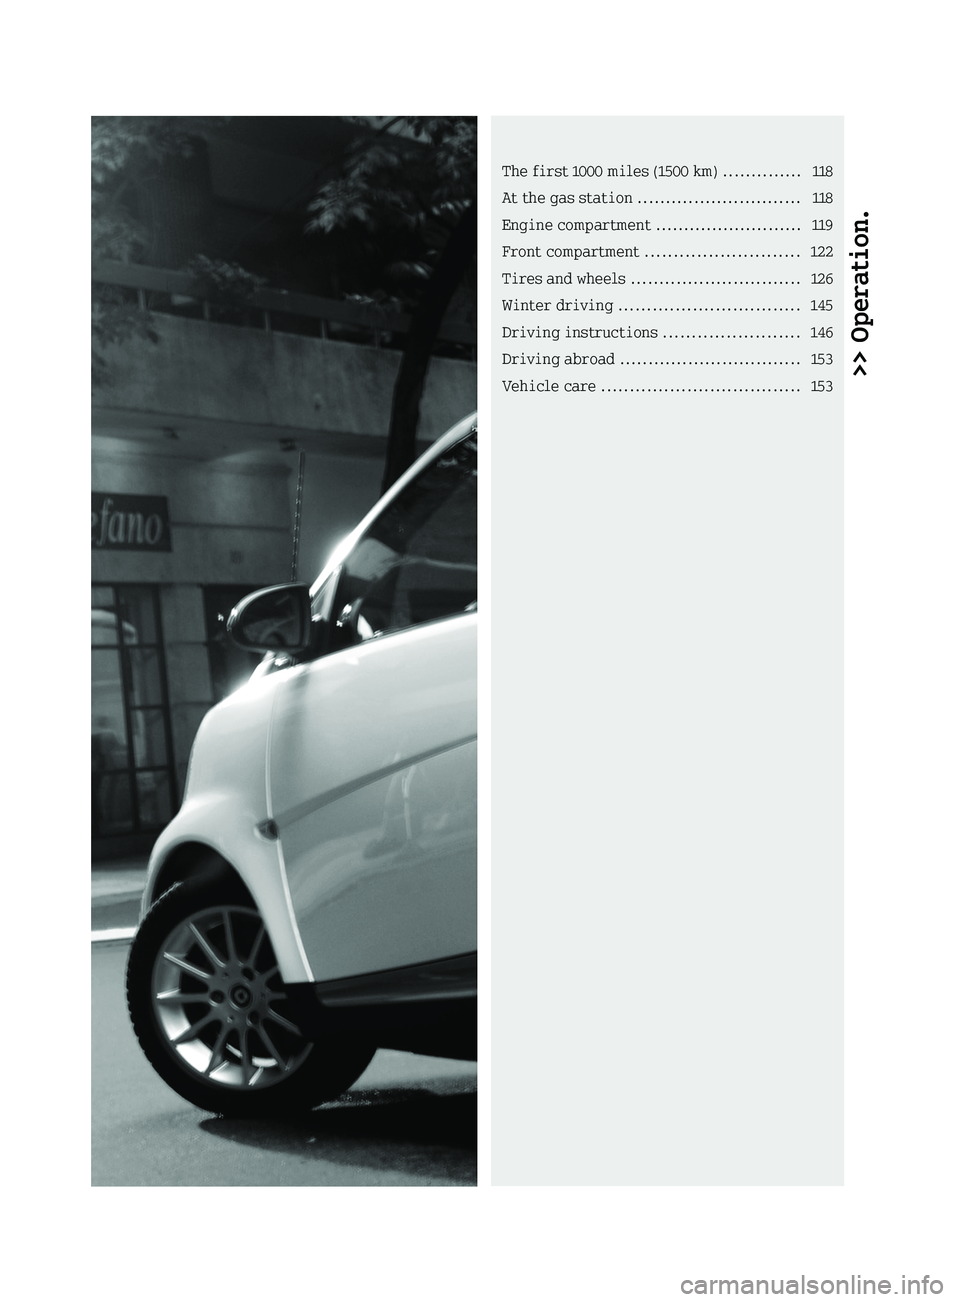 SMART FORTWO COUPE 2011  Owners Manual >> Operation.The first 1000 miles (1500 km) ..............118
At the gas station .............................118
Engine compartment .......................... 119
Front compartment ..................